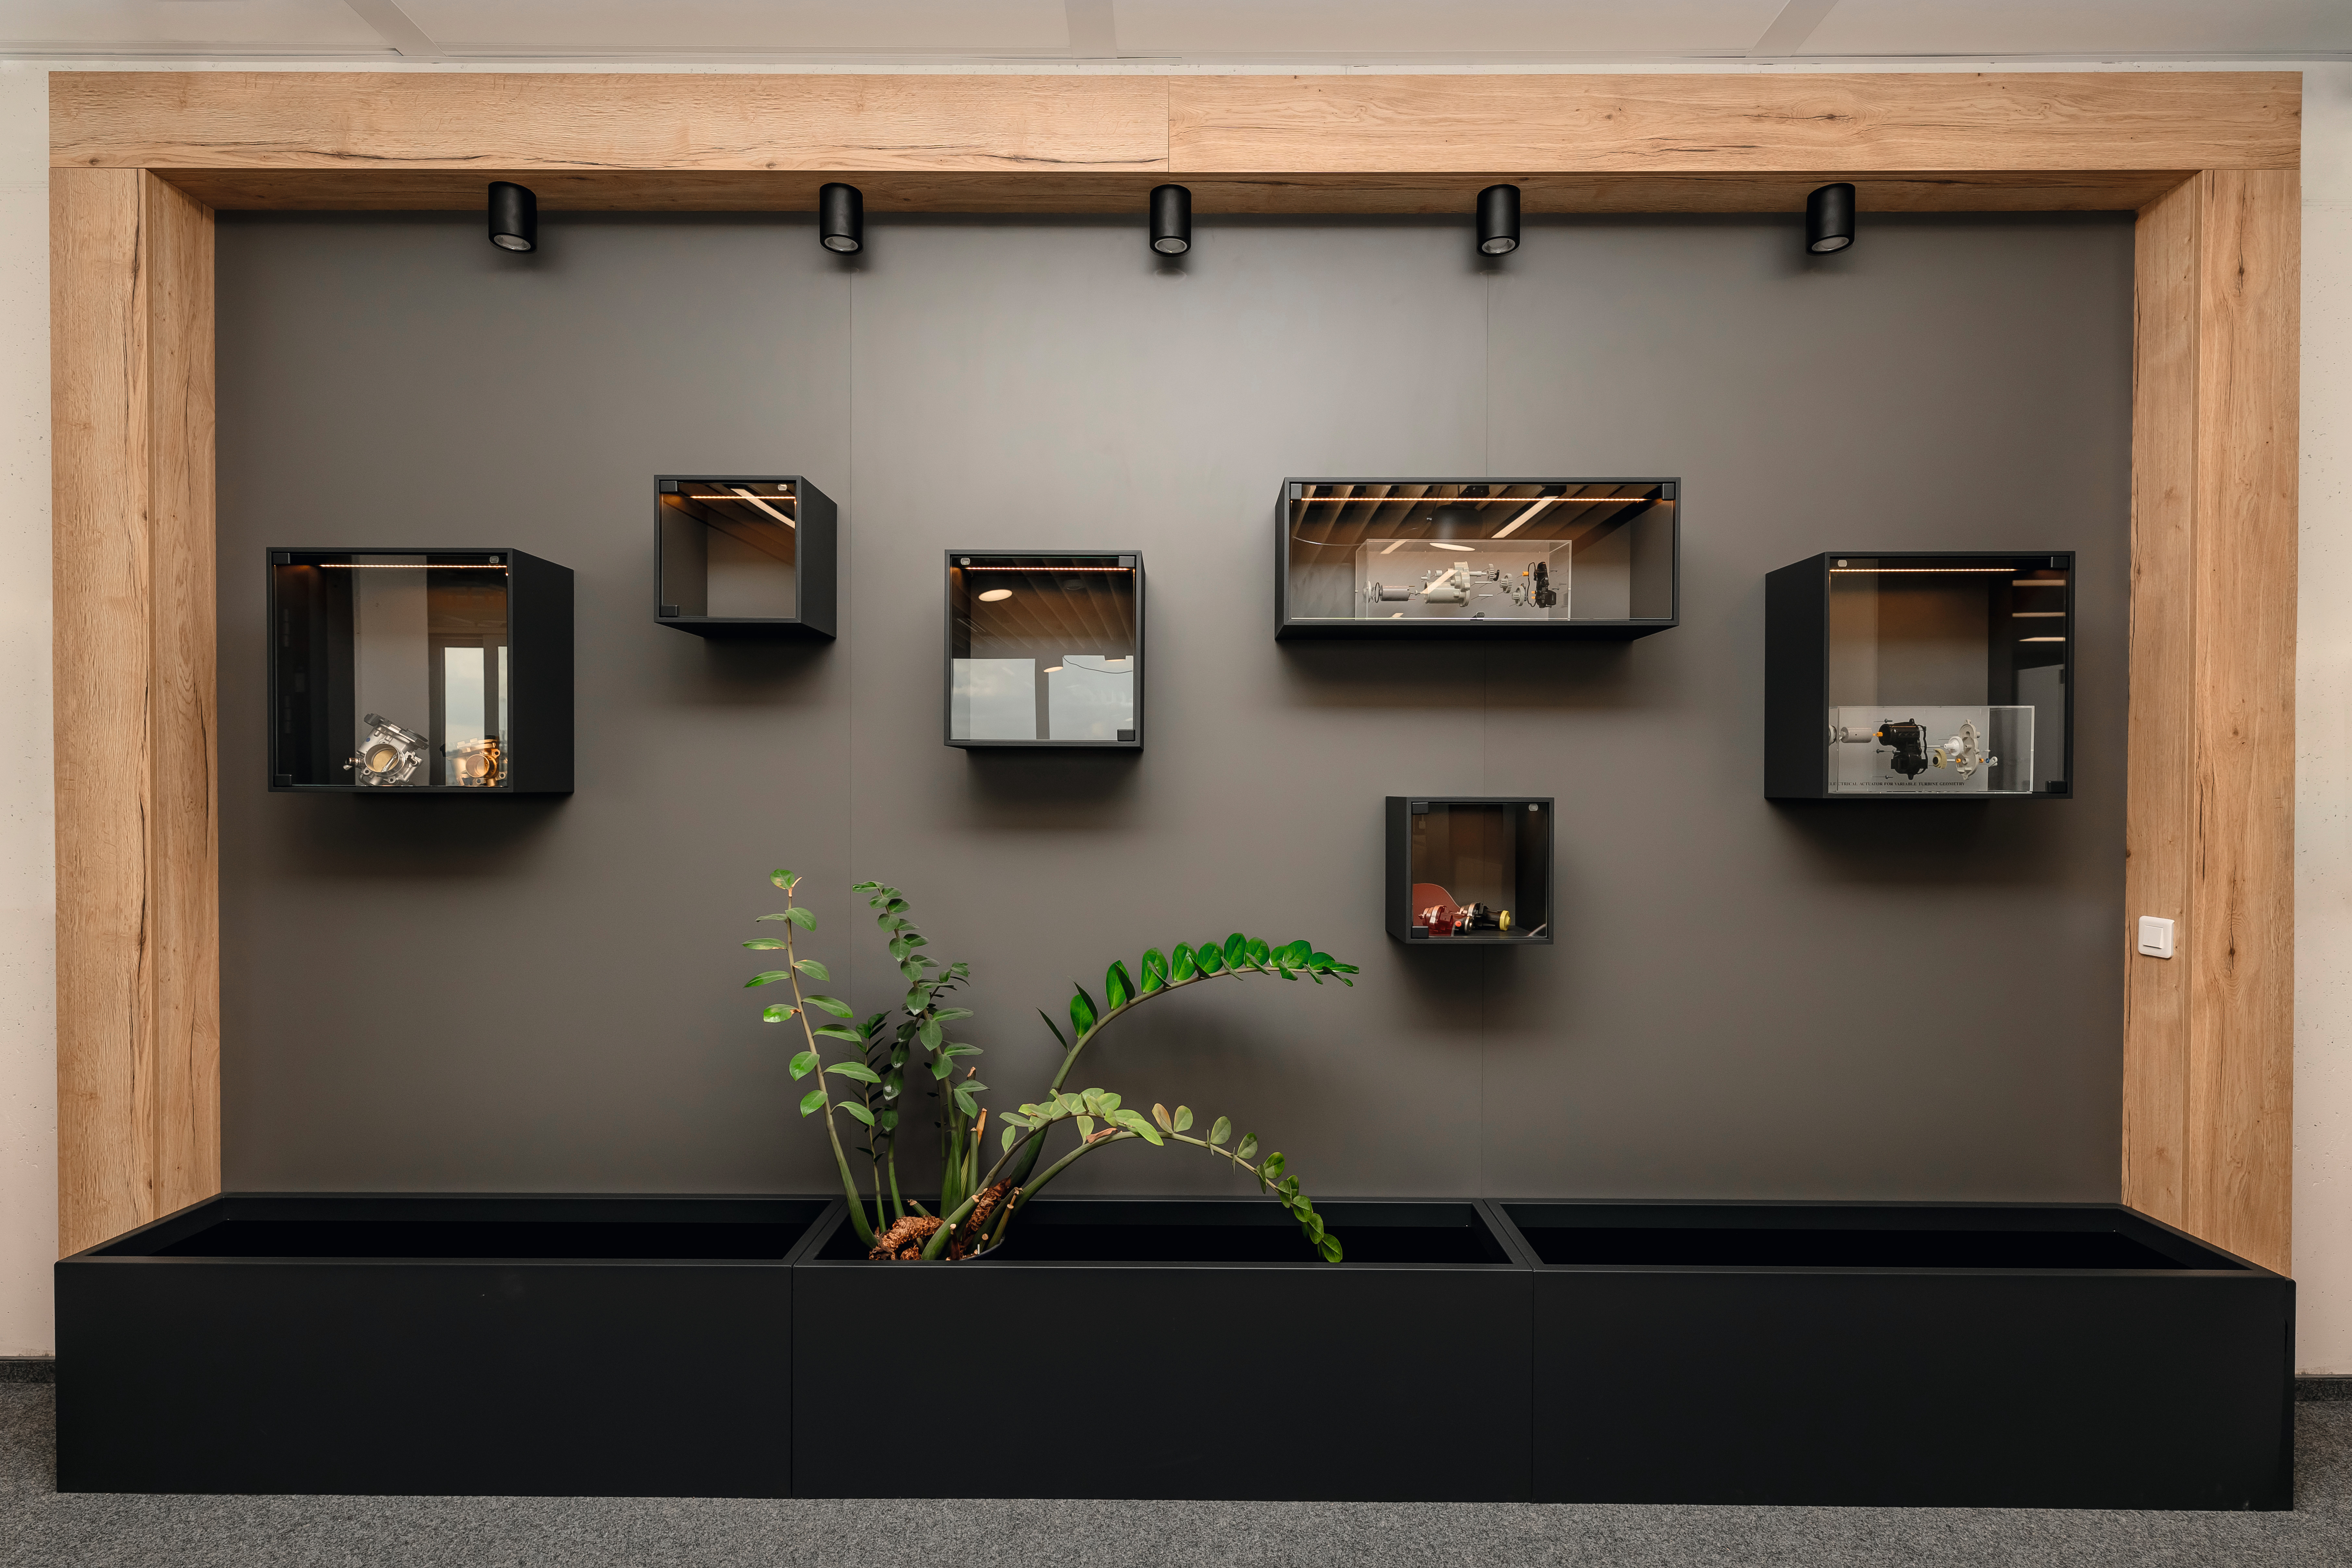 The new offices are not only functional, but also highly aesthetic. The sophisticated elements and furniture-like decorative planters in the U899 ST9 Soft Black decor improve the working environment.